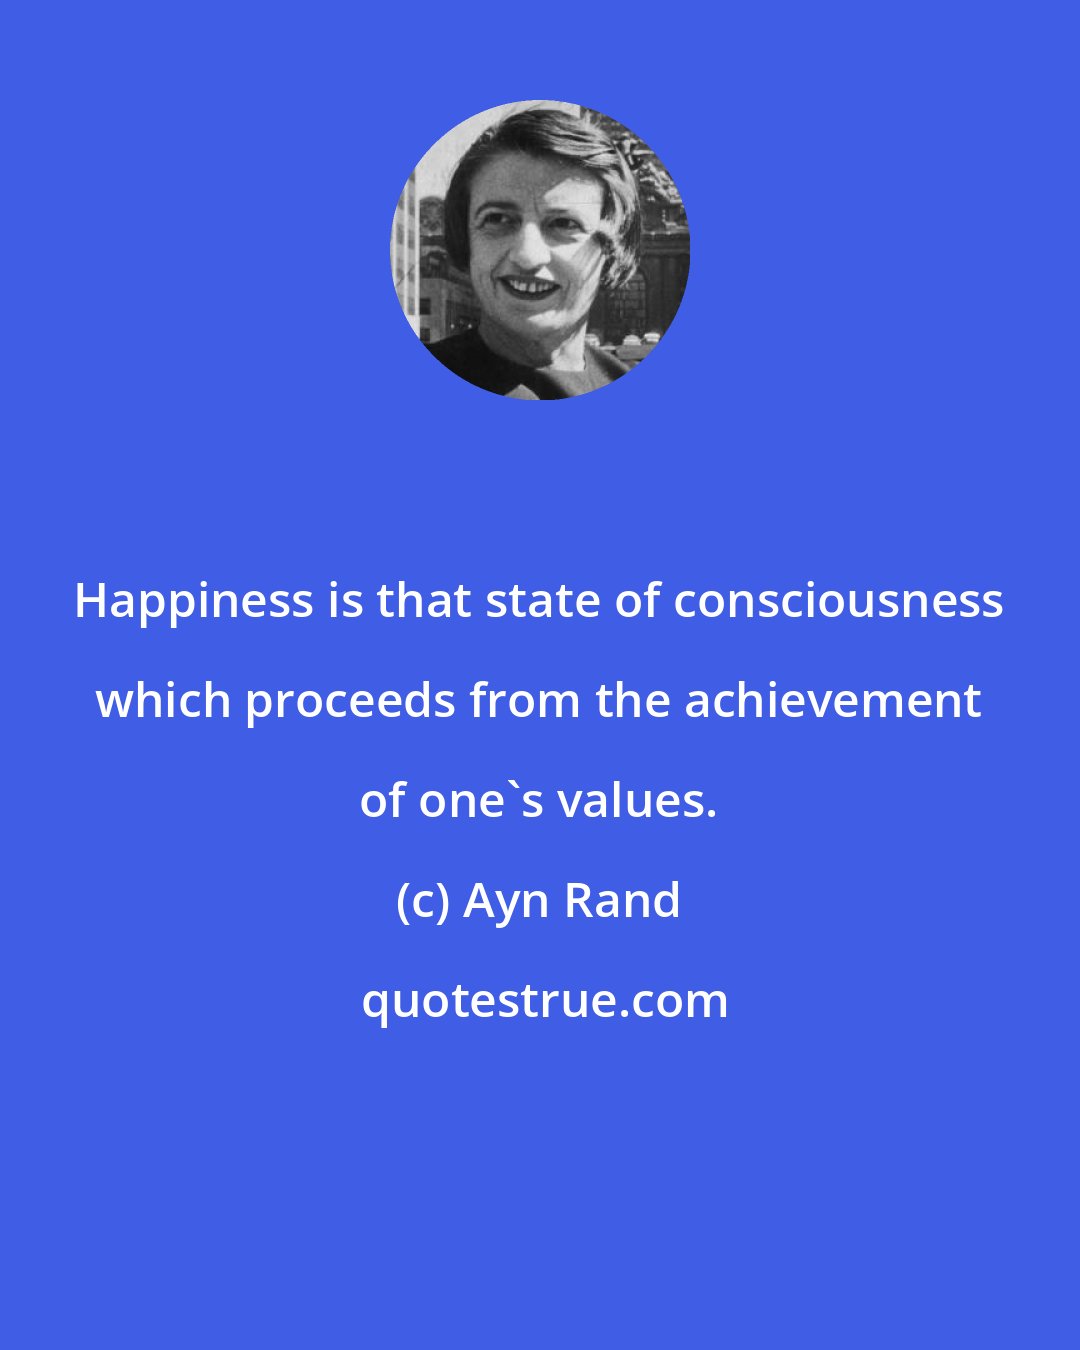 Ayn Rand: Happiness is that state of consciousness which proceeds from the achievement of one's values.